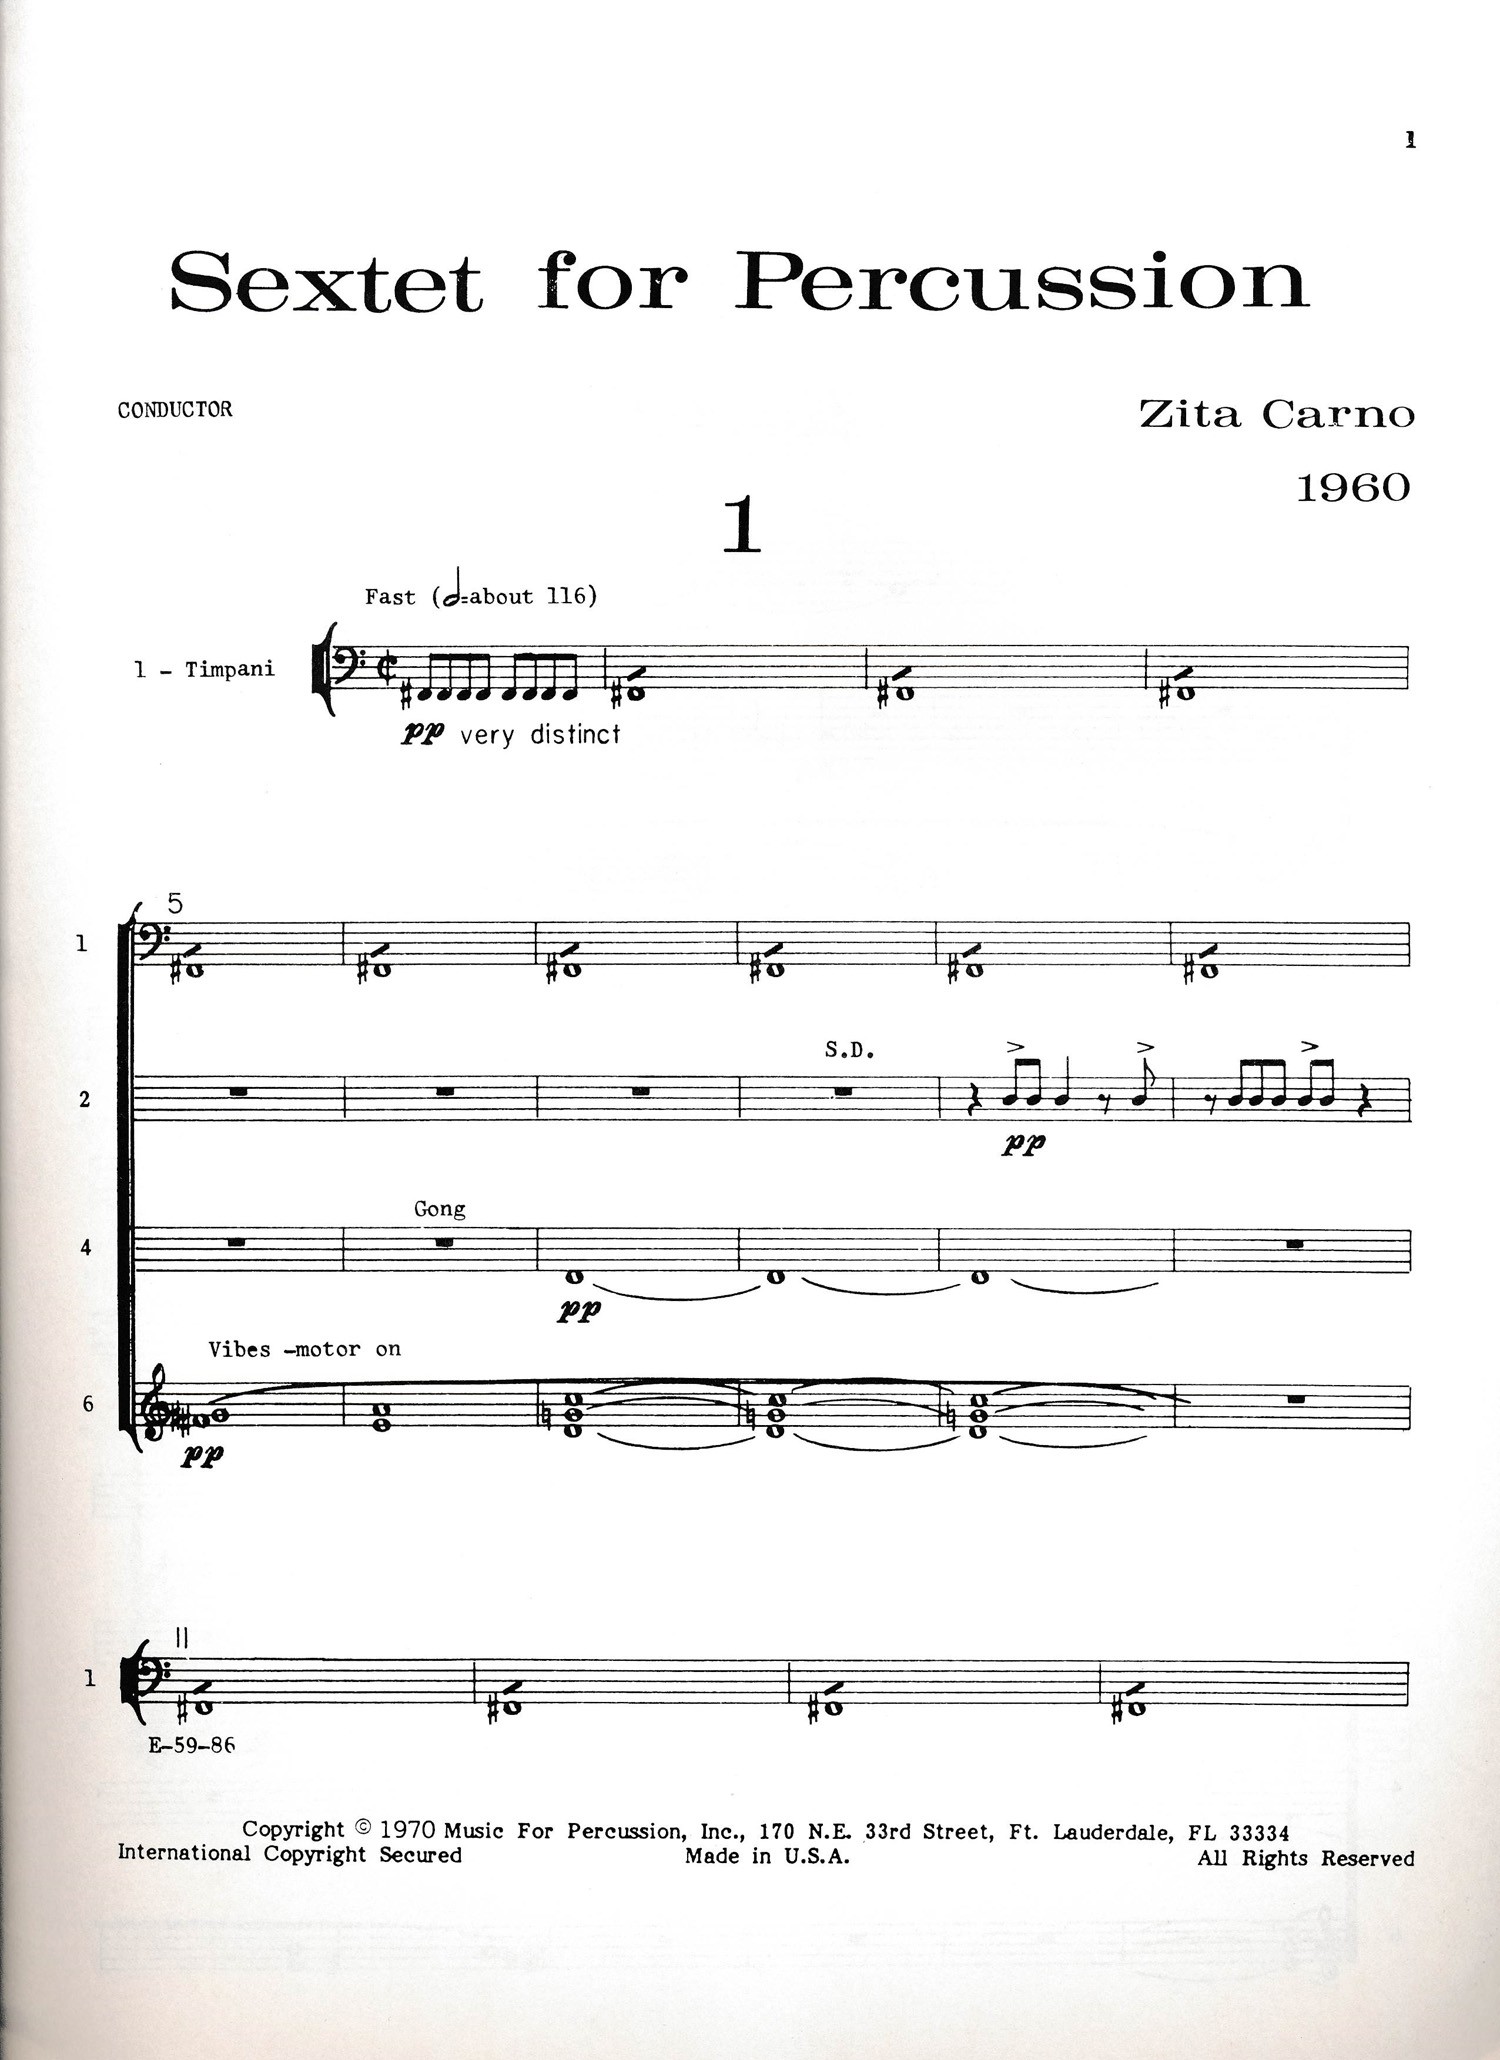 Sextet For Percussion by Carno Zita